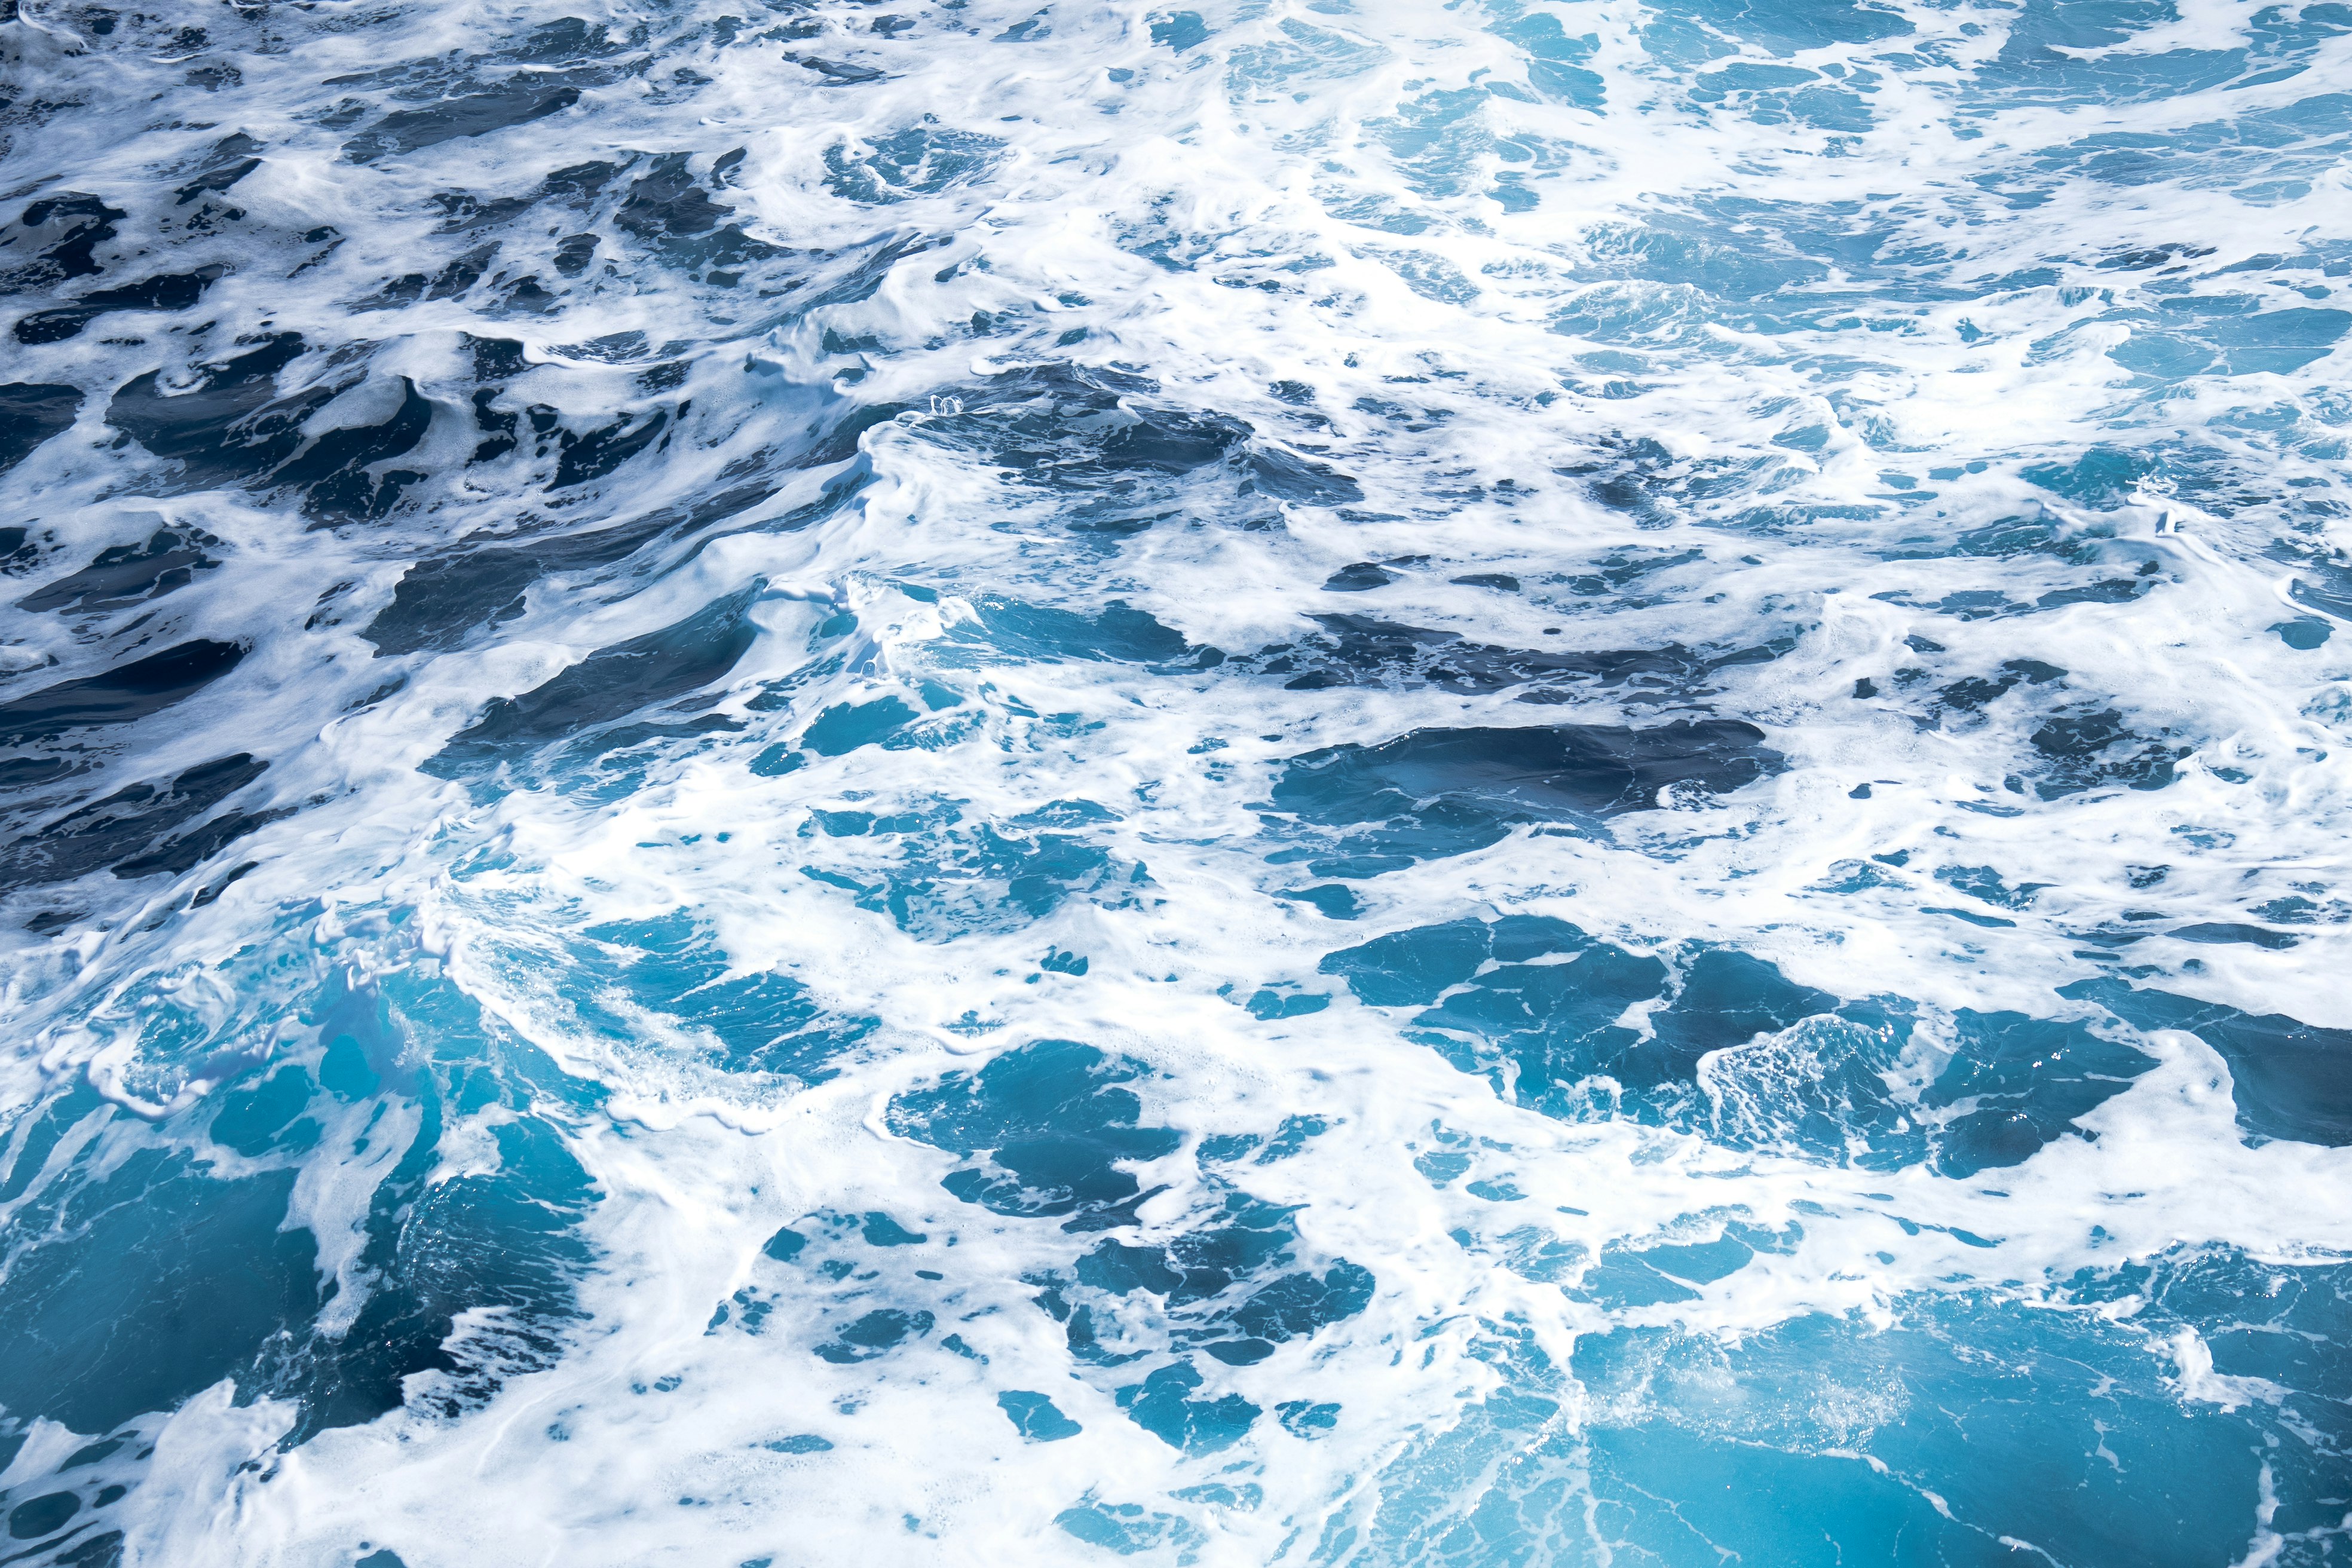 Dreamy colours in the rough ocean, taken in the Drake Passage, known as the roughest ocean on the planet during a boat journey between Argentina & the Antarctic Peninsula.